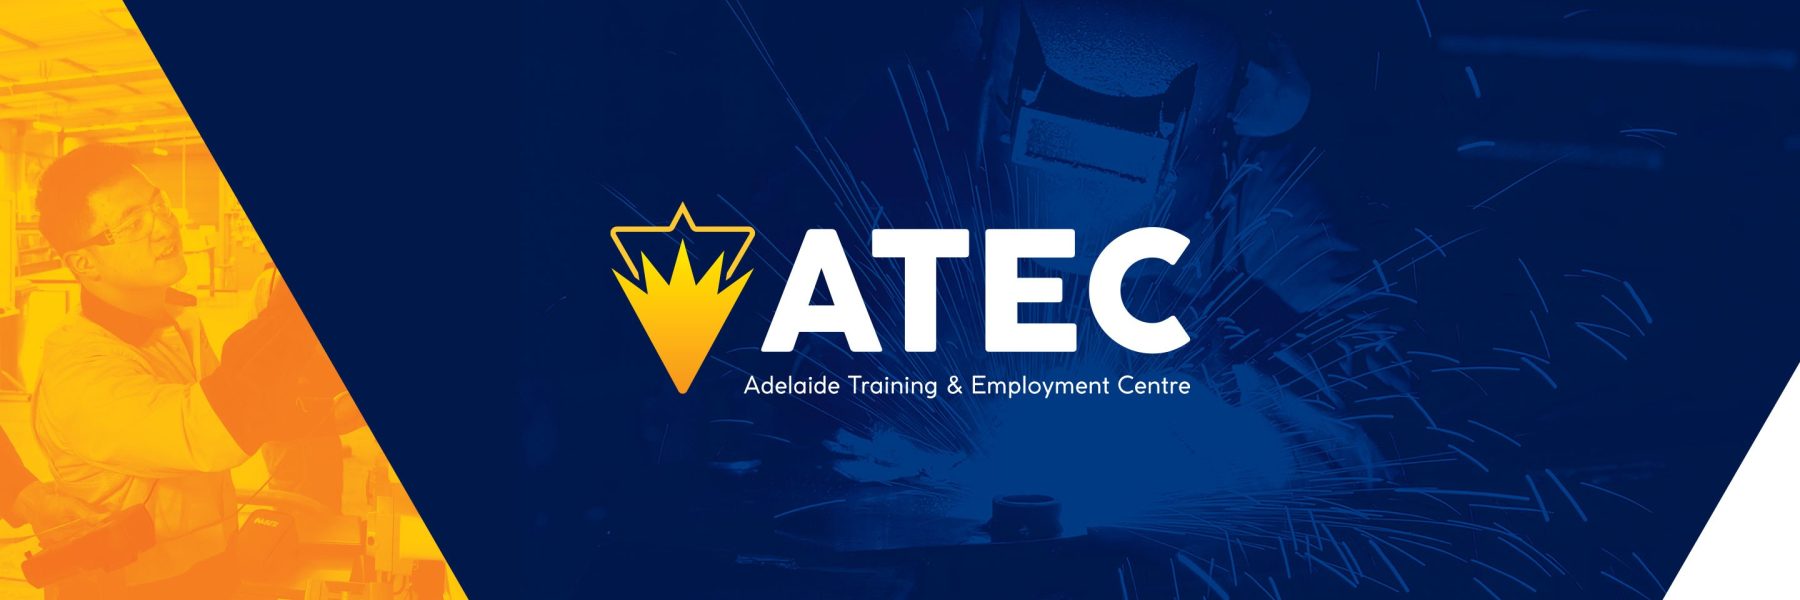 Adelaide Training and Employment Centre logo design by Quisk